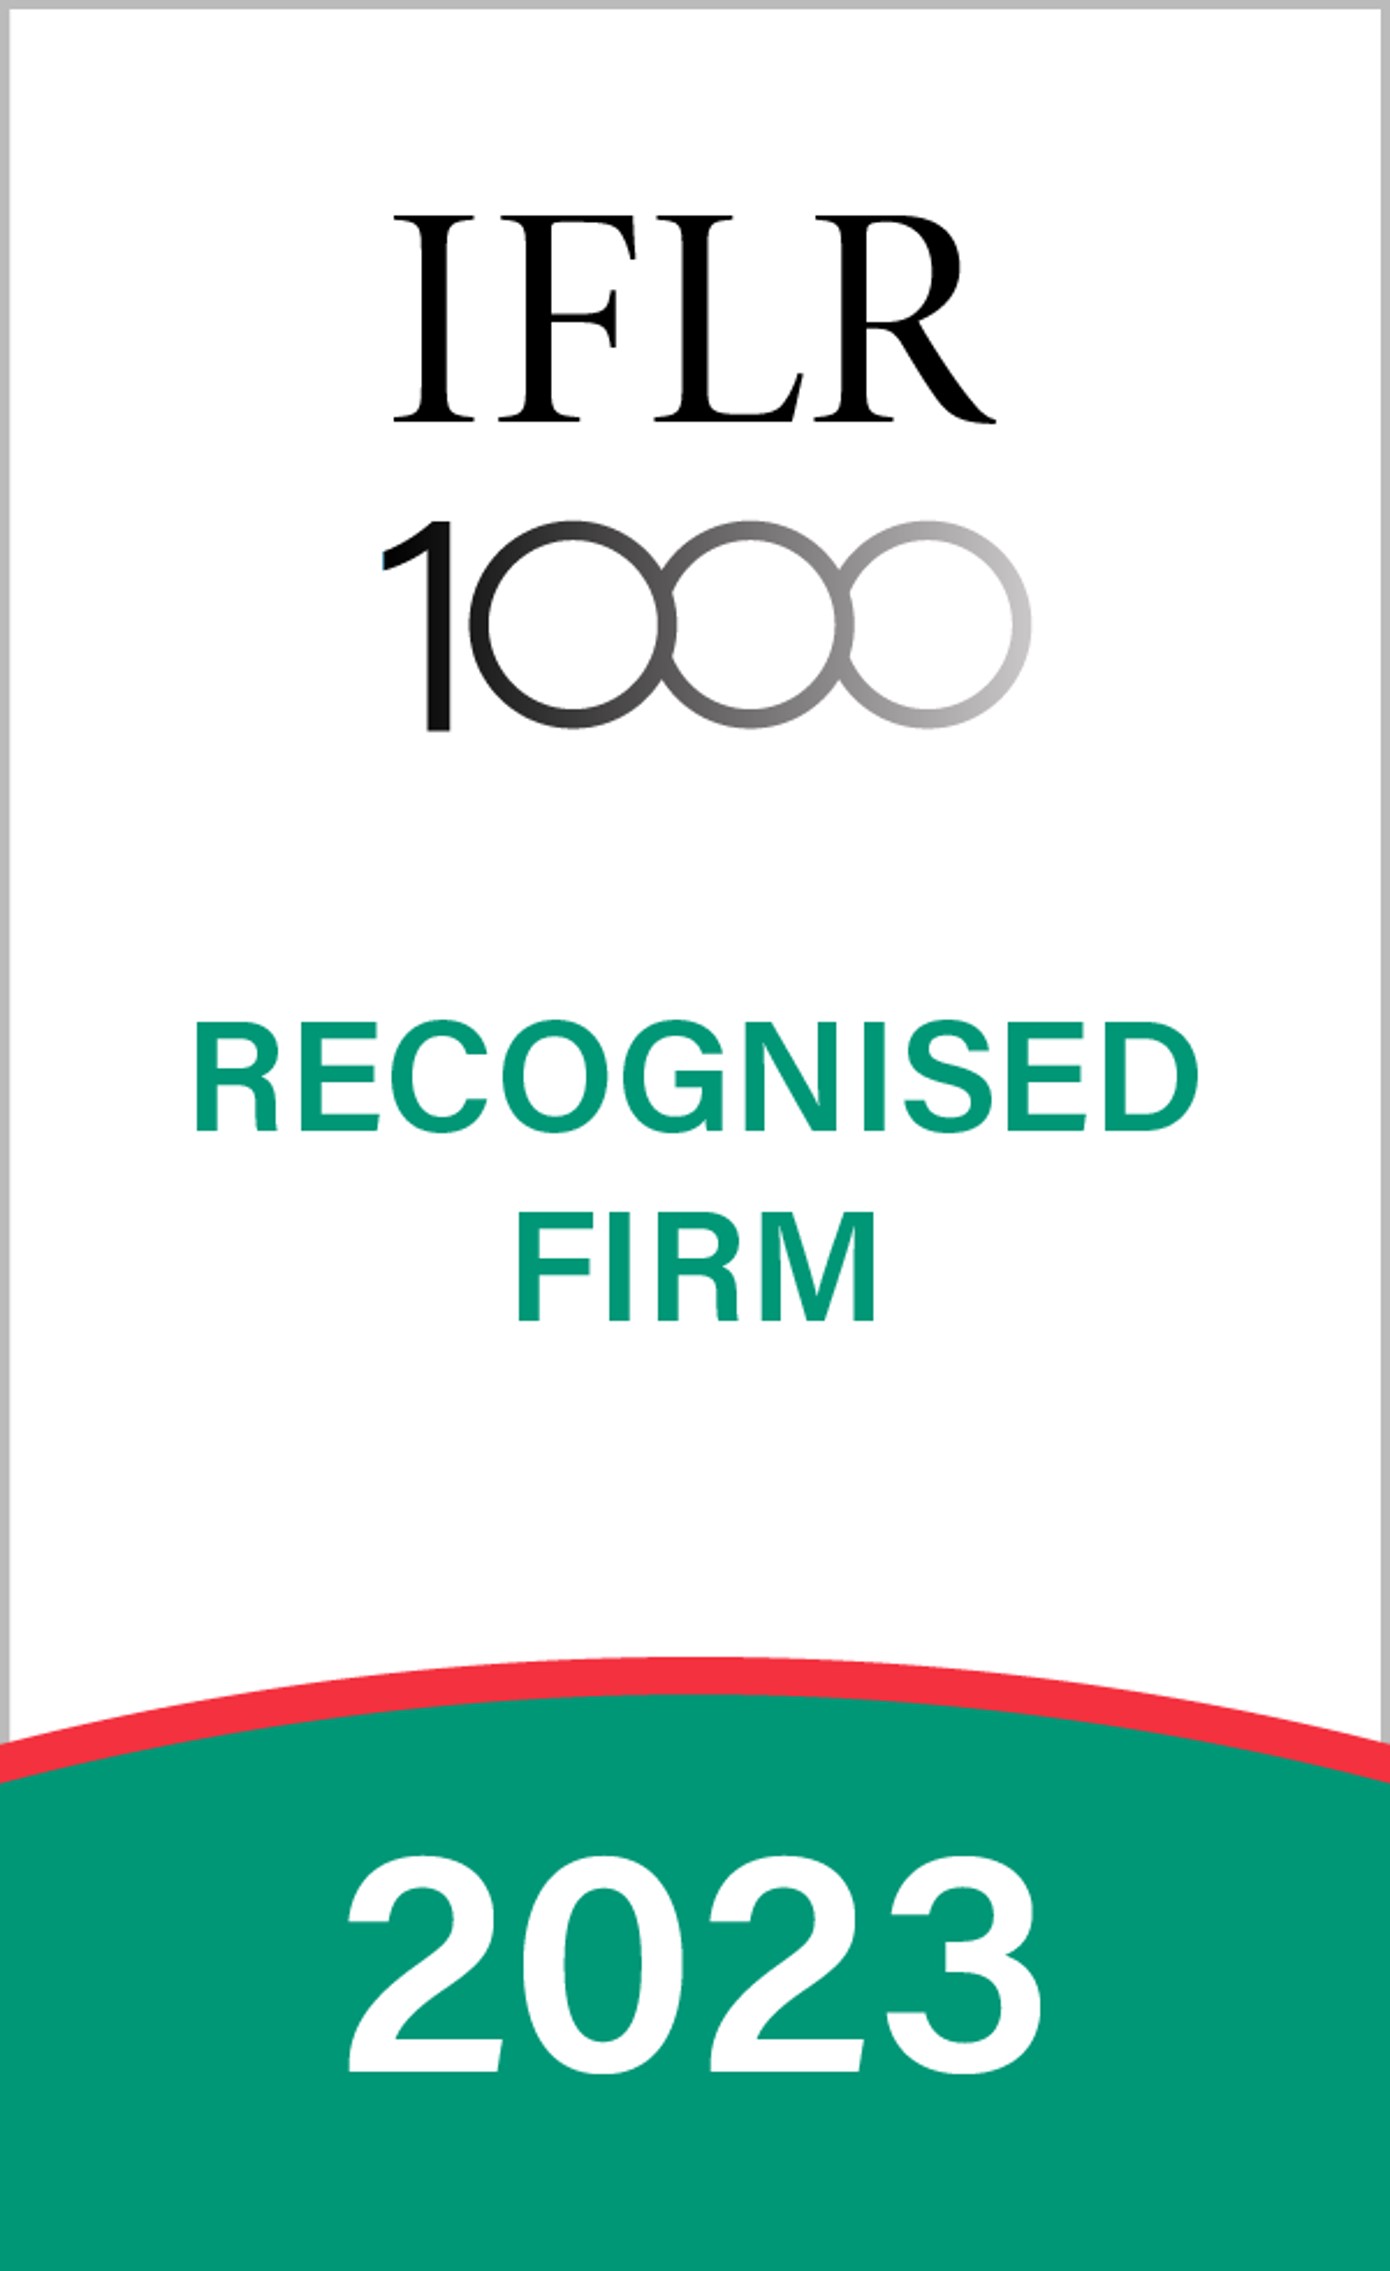 LC Lawyers has been ranked as a Notable Hong Kong law firm in four practice areas by IFLR1000 APAC Rankings 2023